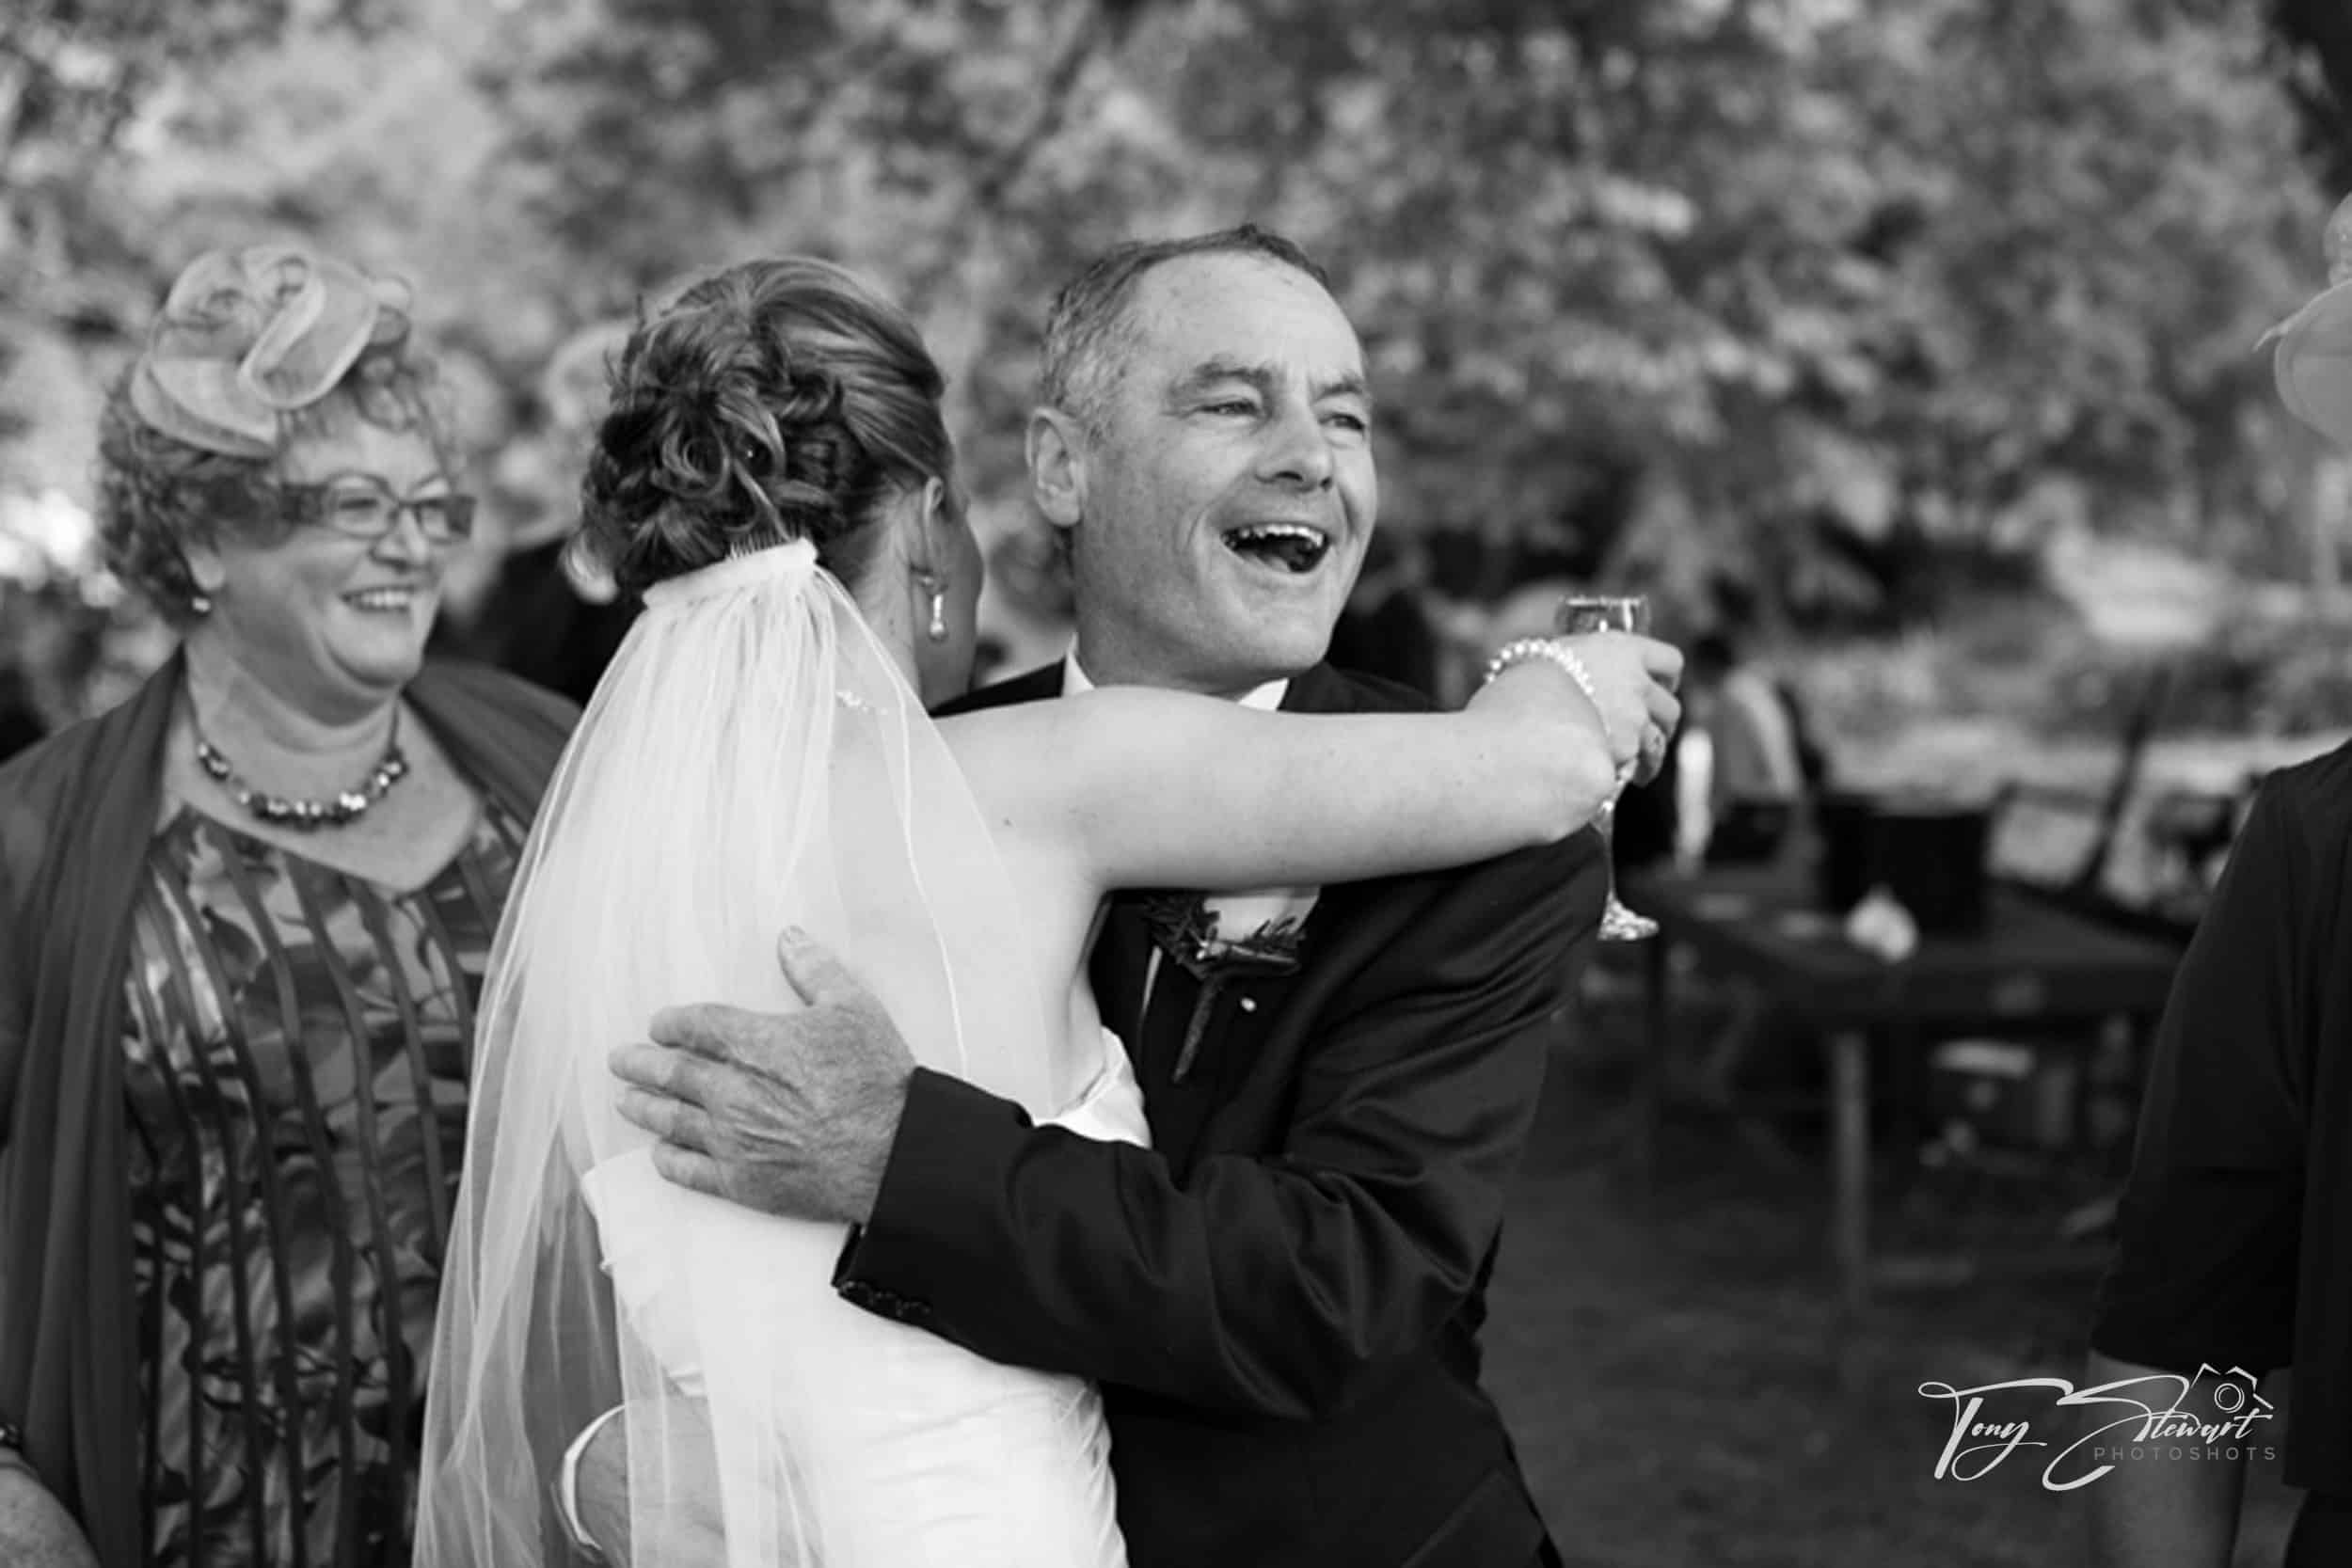 Dad laughs and hugs bride after her wedding ceremony.